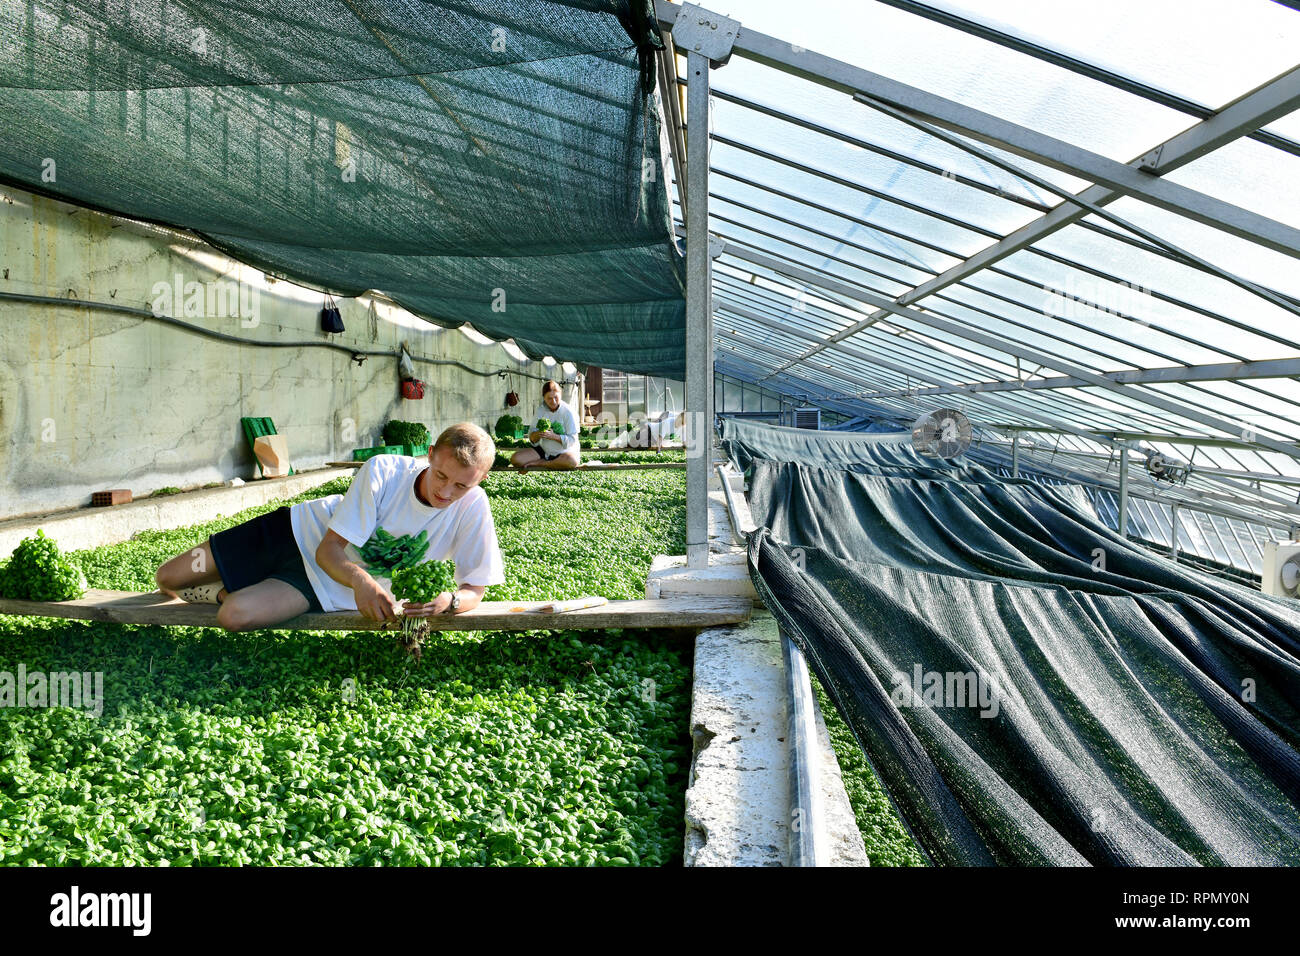 Basil picking by hand at Azienda Agricola Ruggero Rossi, a family-run basil grower specialised in the cultivation of DOP Genoese basil. Stock Photo